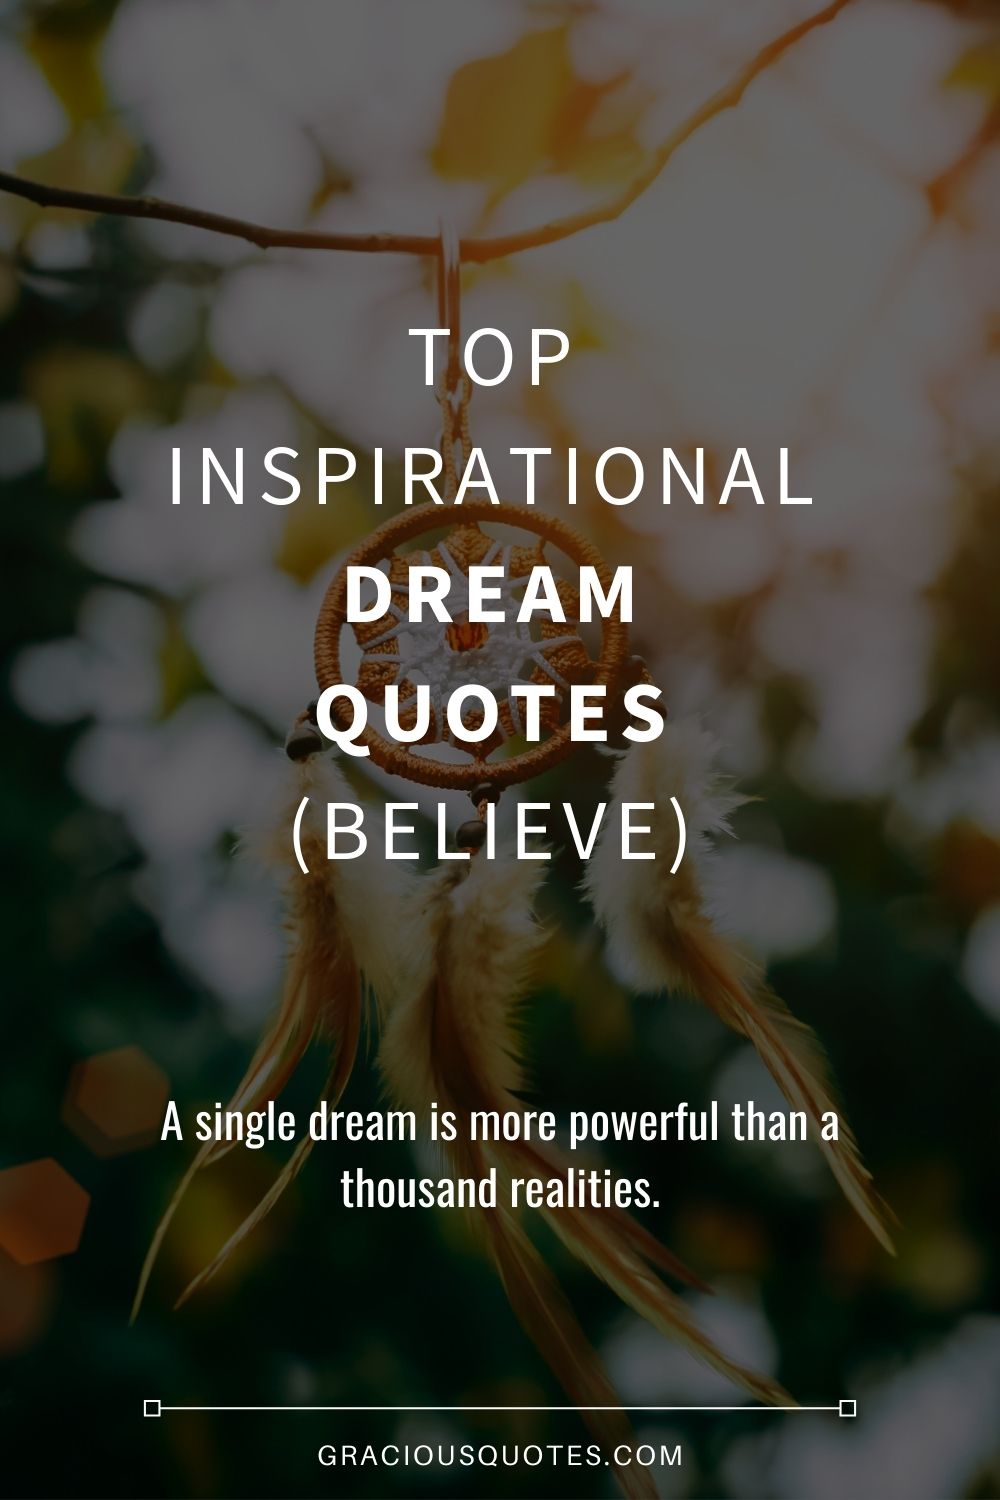 Top Inspirational Dream Quotes (BELIEVE) - Gracious Quotes